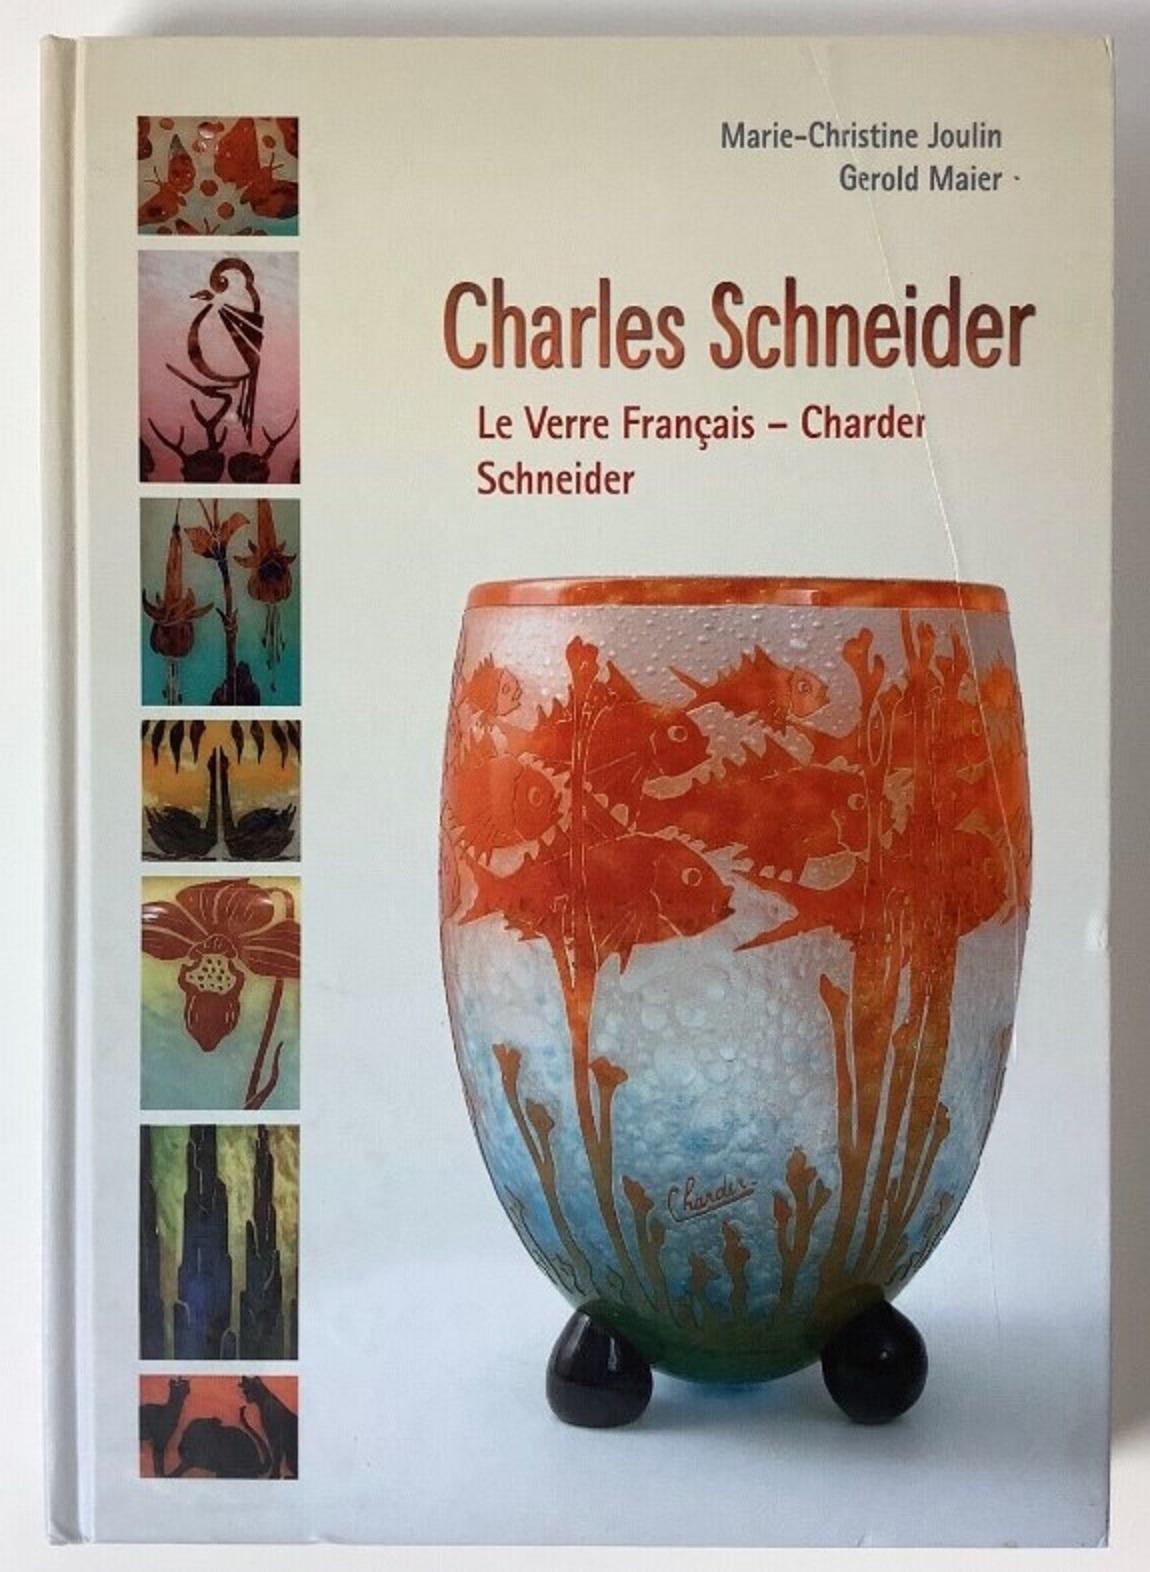 Monumental Vase Sign: Le Verre Francais ( Decoration Chene )
acid worked
Le Verre cameo glass was a separate line of art glass designed by Charles Schneider. Its production was made at the same time as the Schneider designed glasses 1918 –1933. But